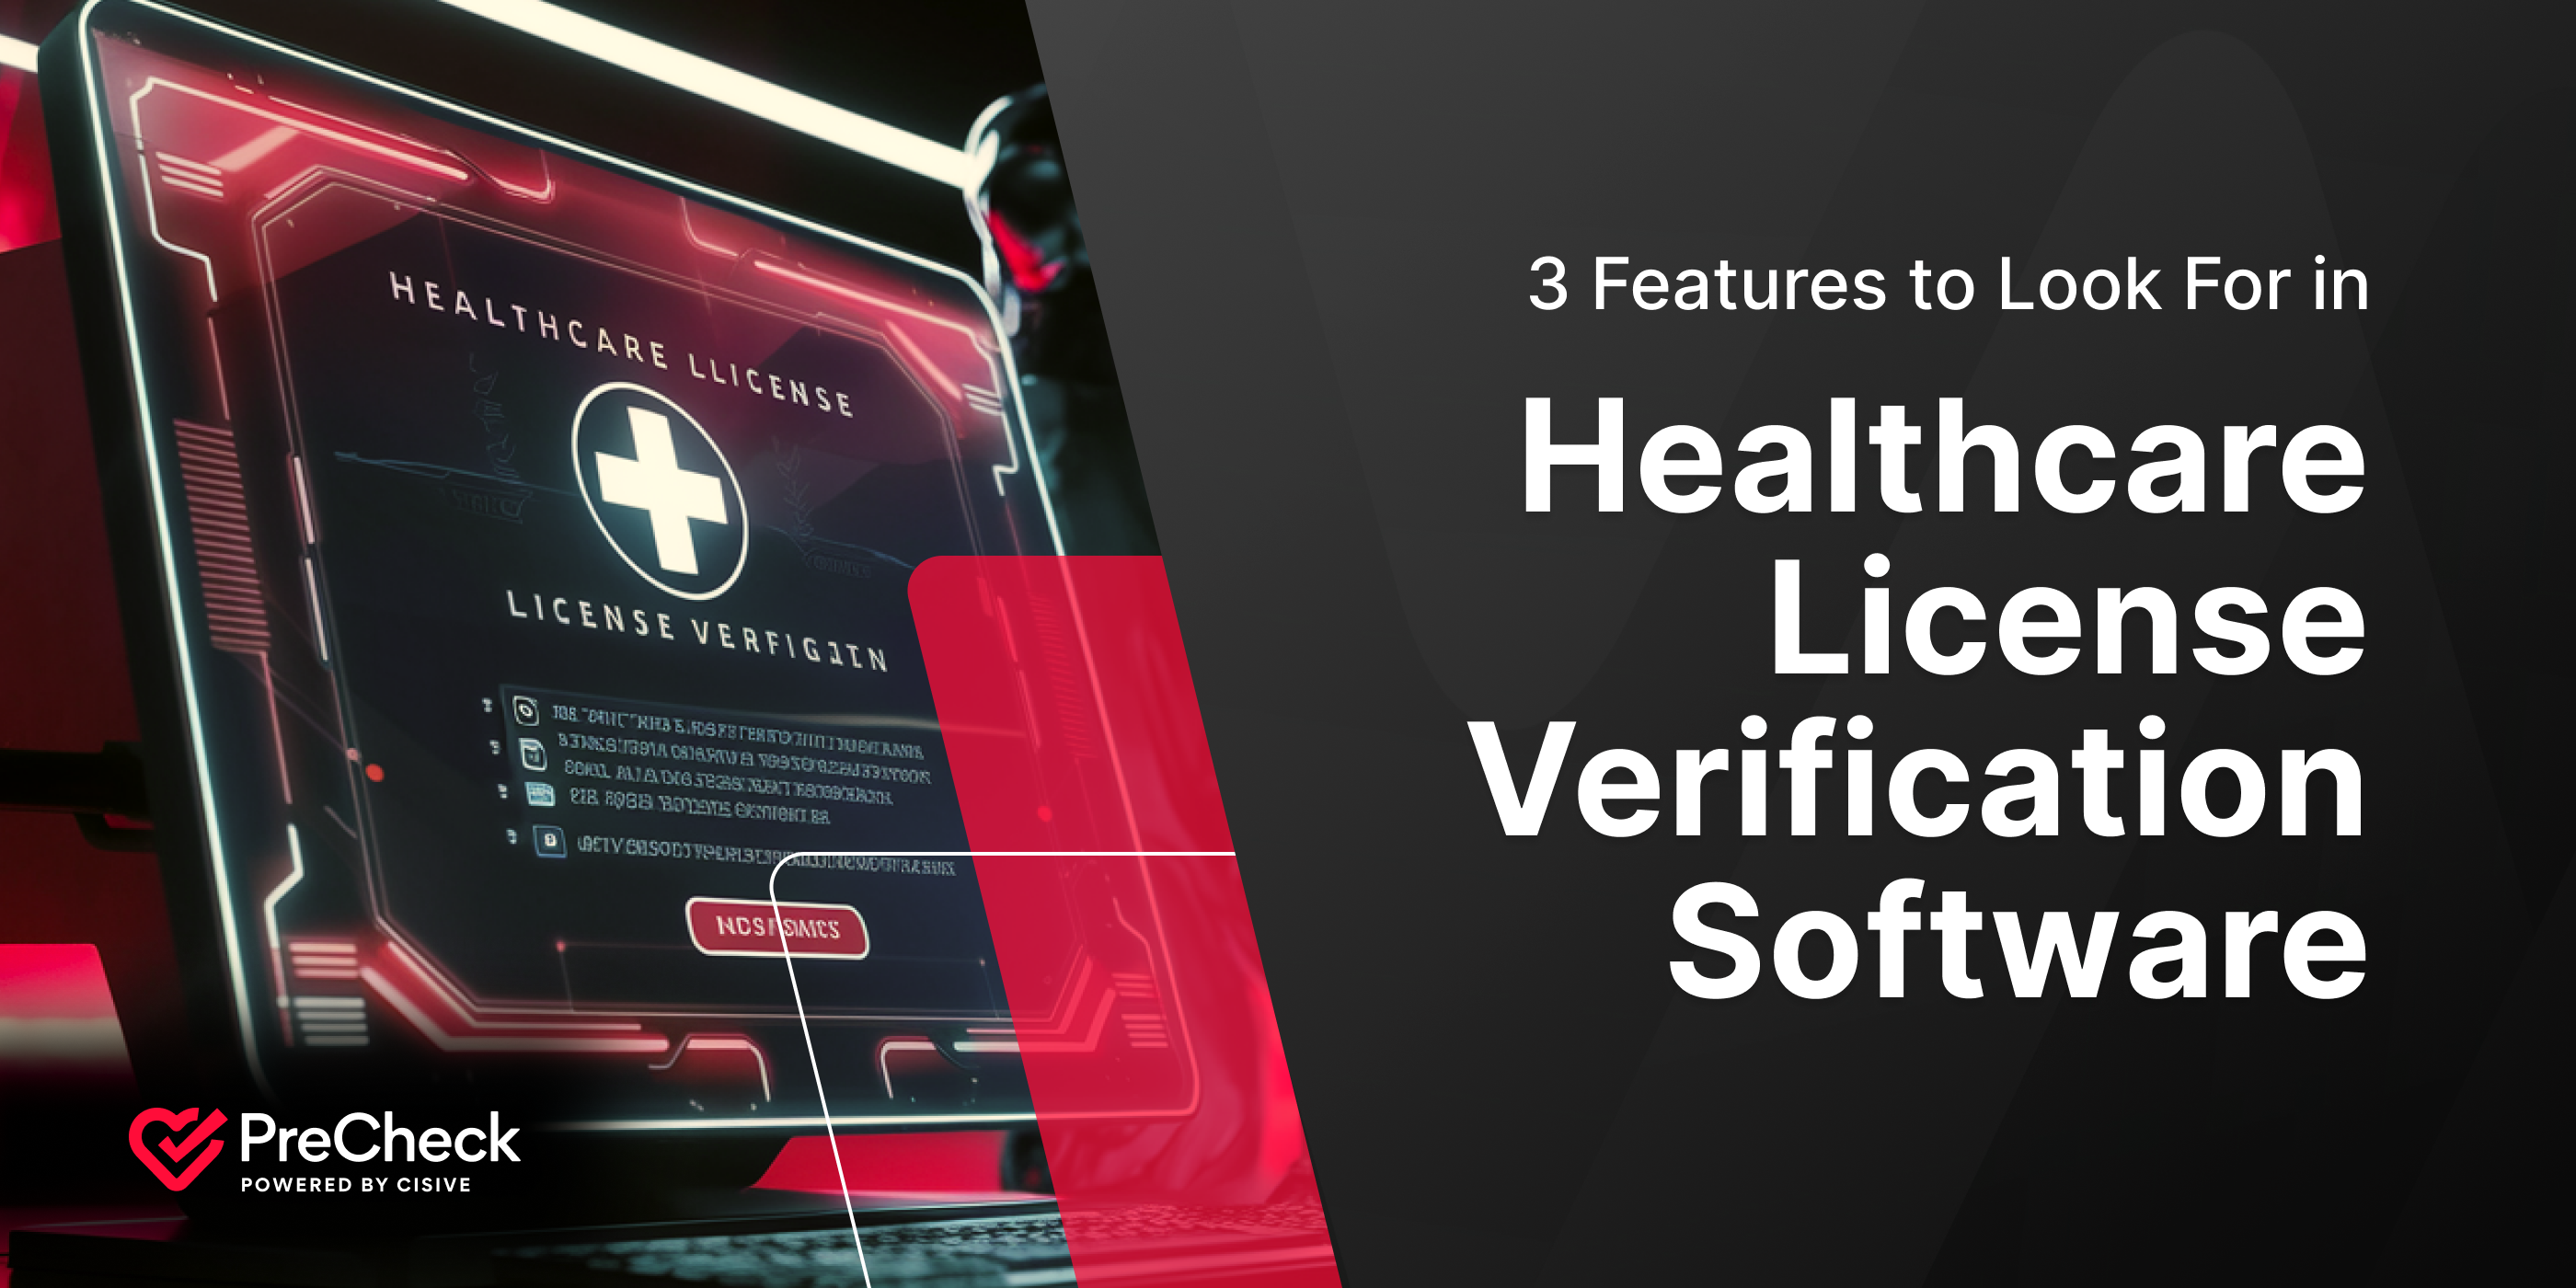 3 Features to Look For in Healthcare License Verification Software. PreCheck, Powered by Cisive. 